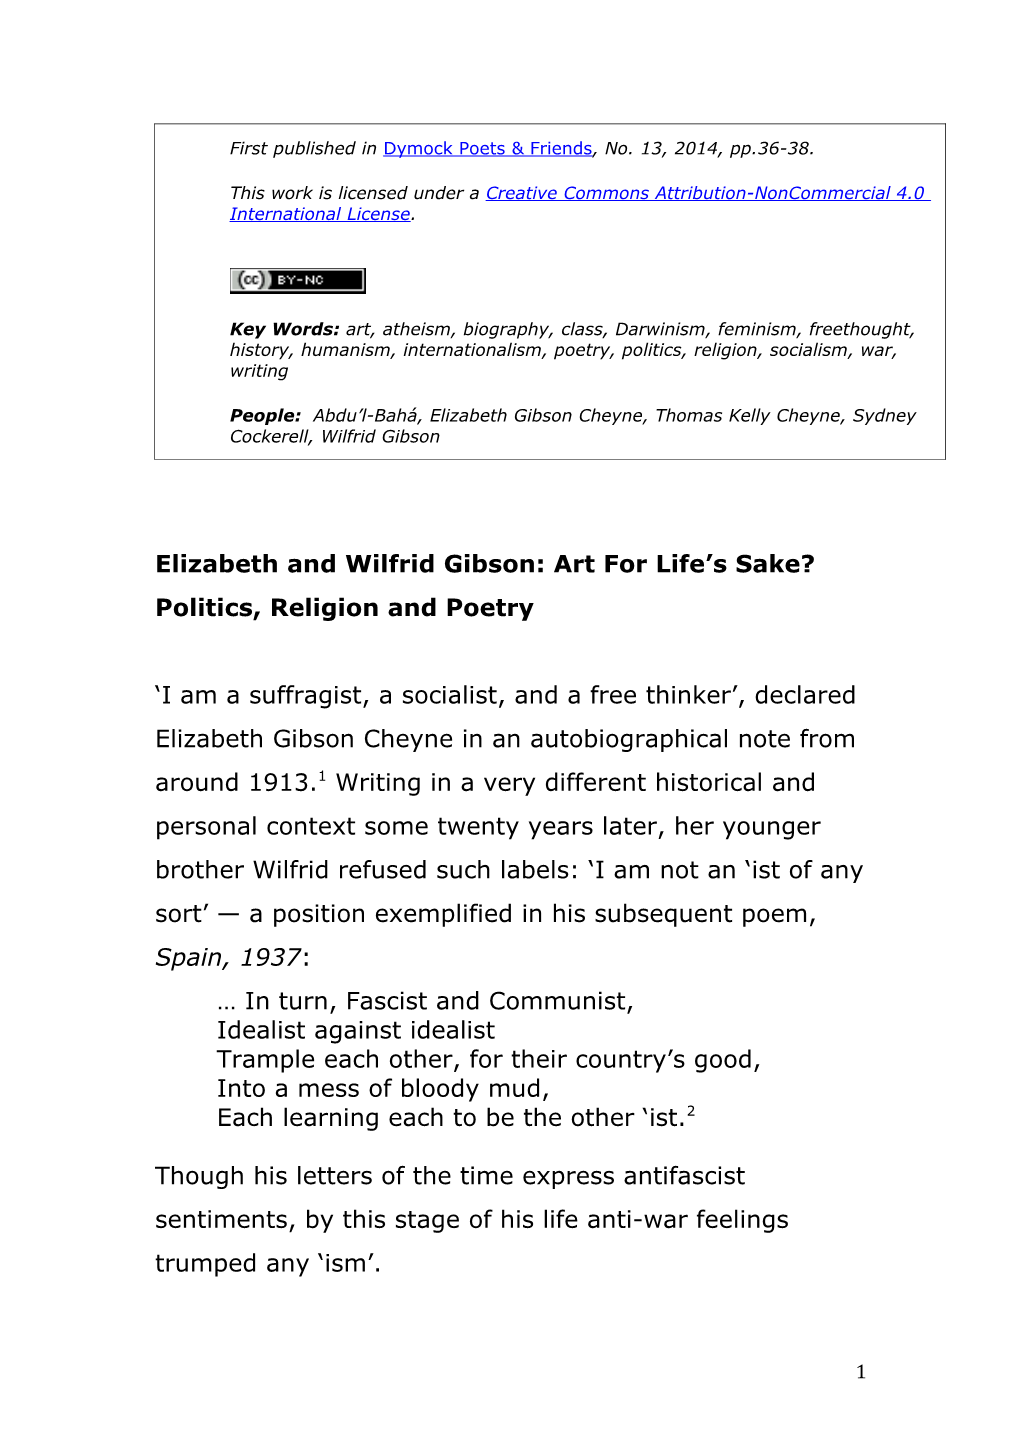 Elizabeth and Wilfrid Gibson: Art for Life S Sake? Politics, Religion and Poetry